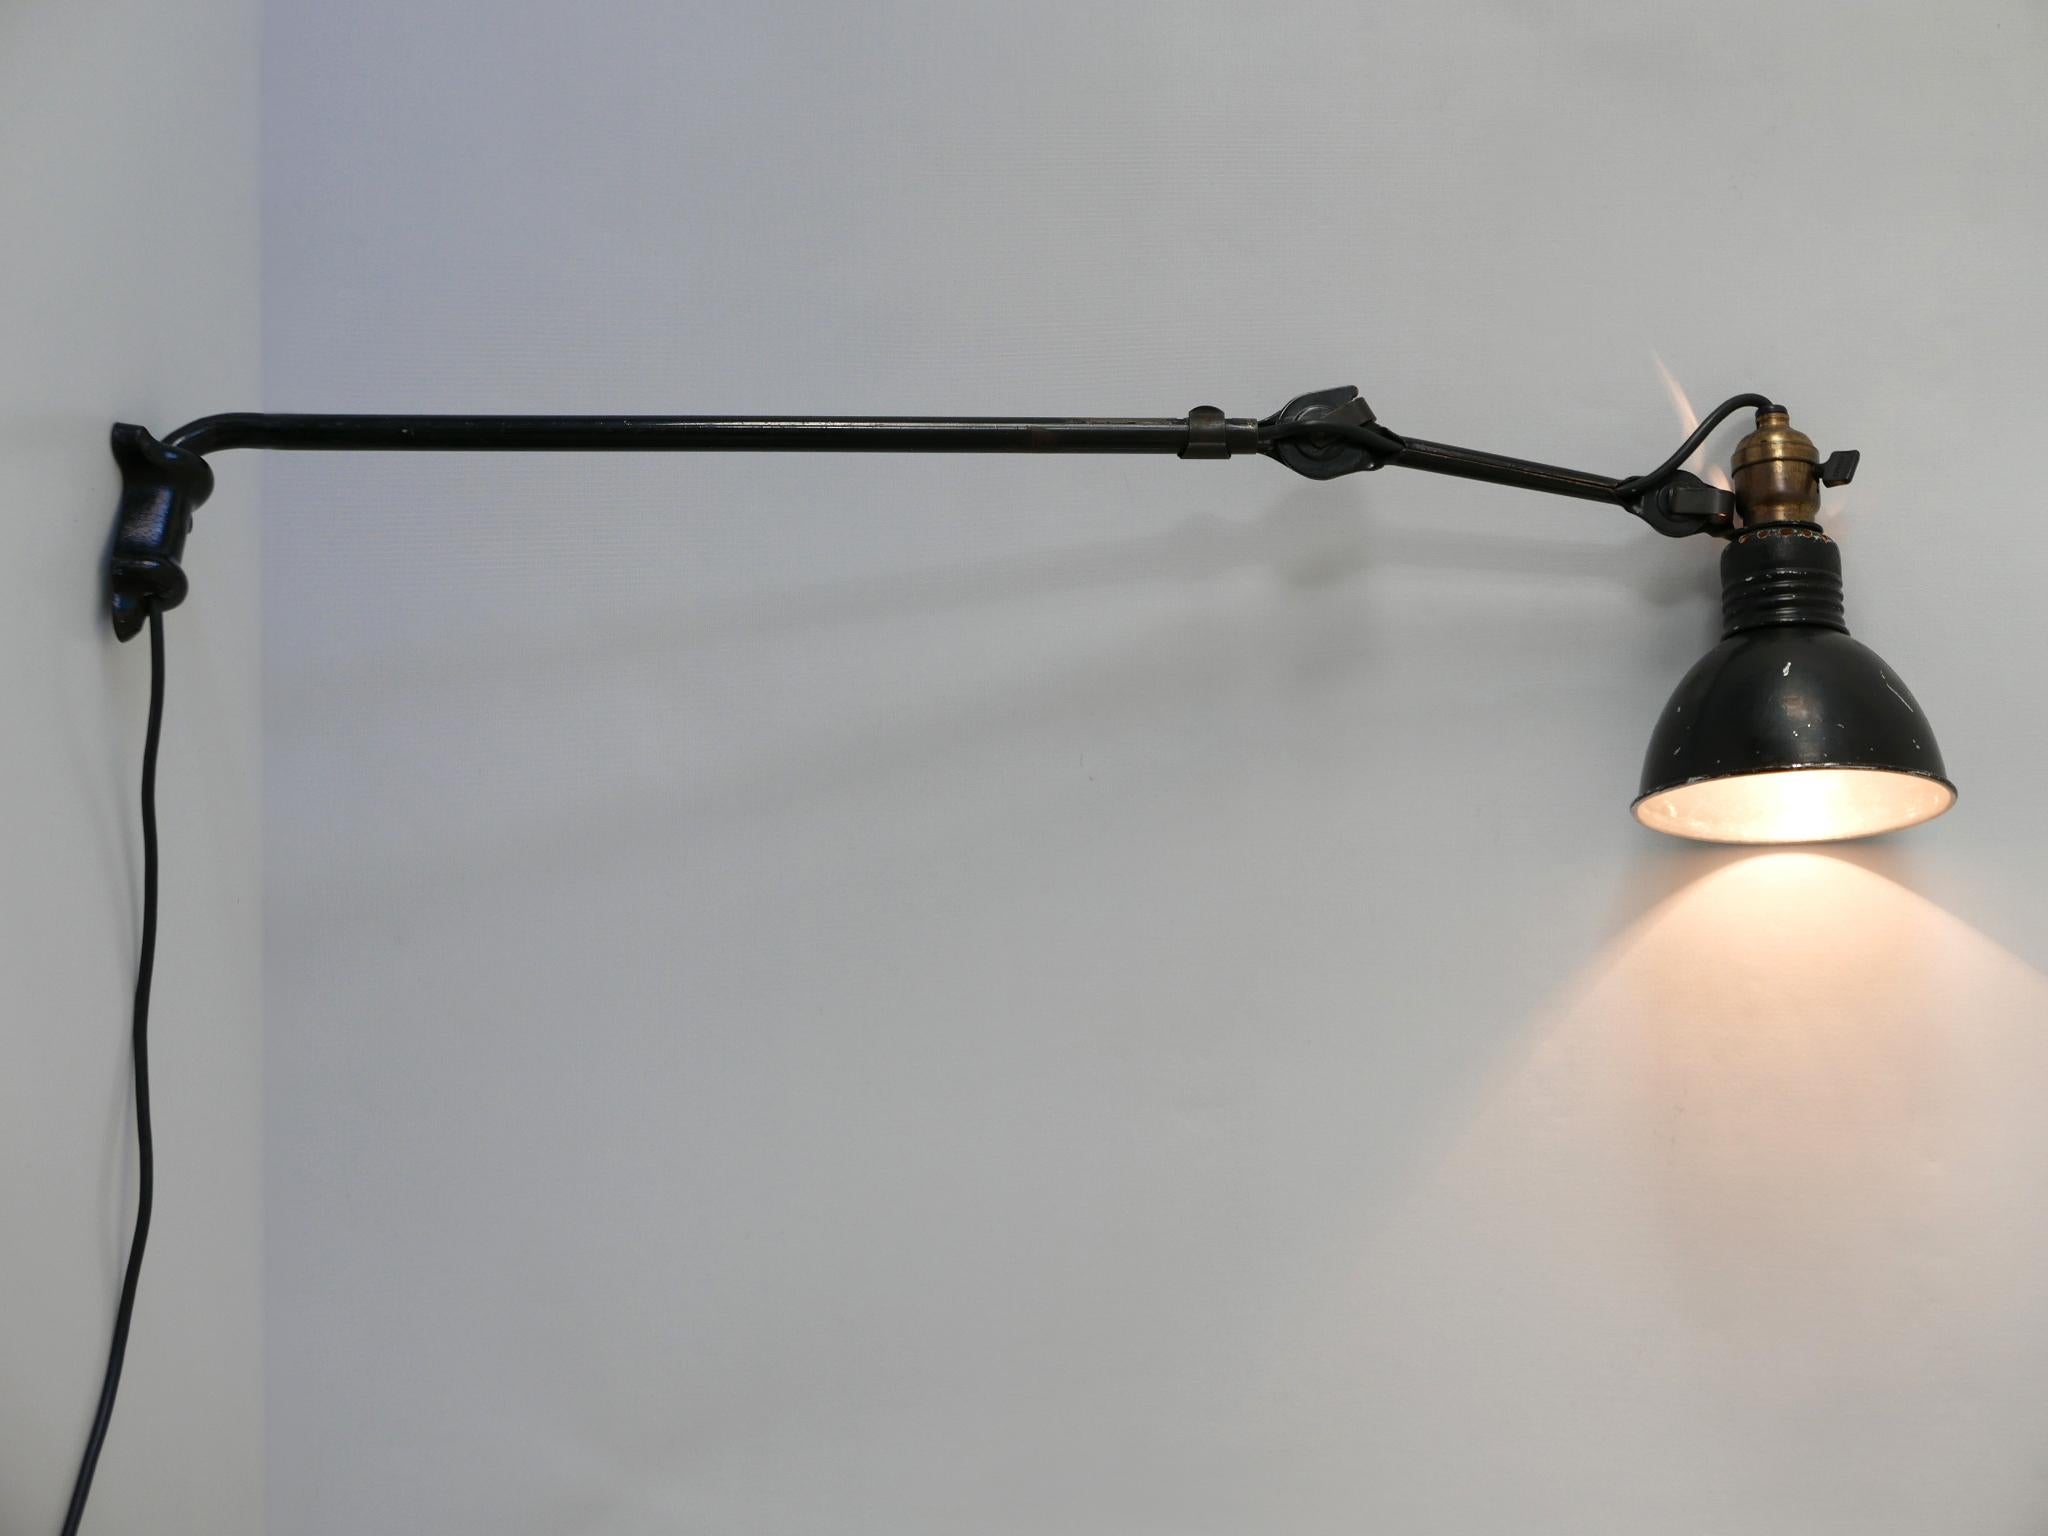 Articulated modernist task light or wall lamp model 203. Designed in 1920s by Bernard-Albin Gras. Manufactured by Gras, France, 1920s.

Executed in black enameled steel and aluminium, the lamp needs 1 x B22 bayonet bulb, is wired and in working